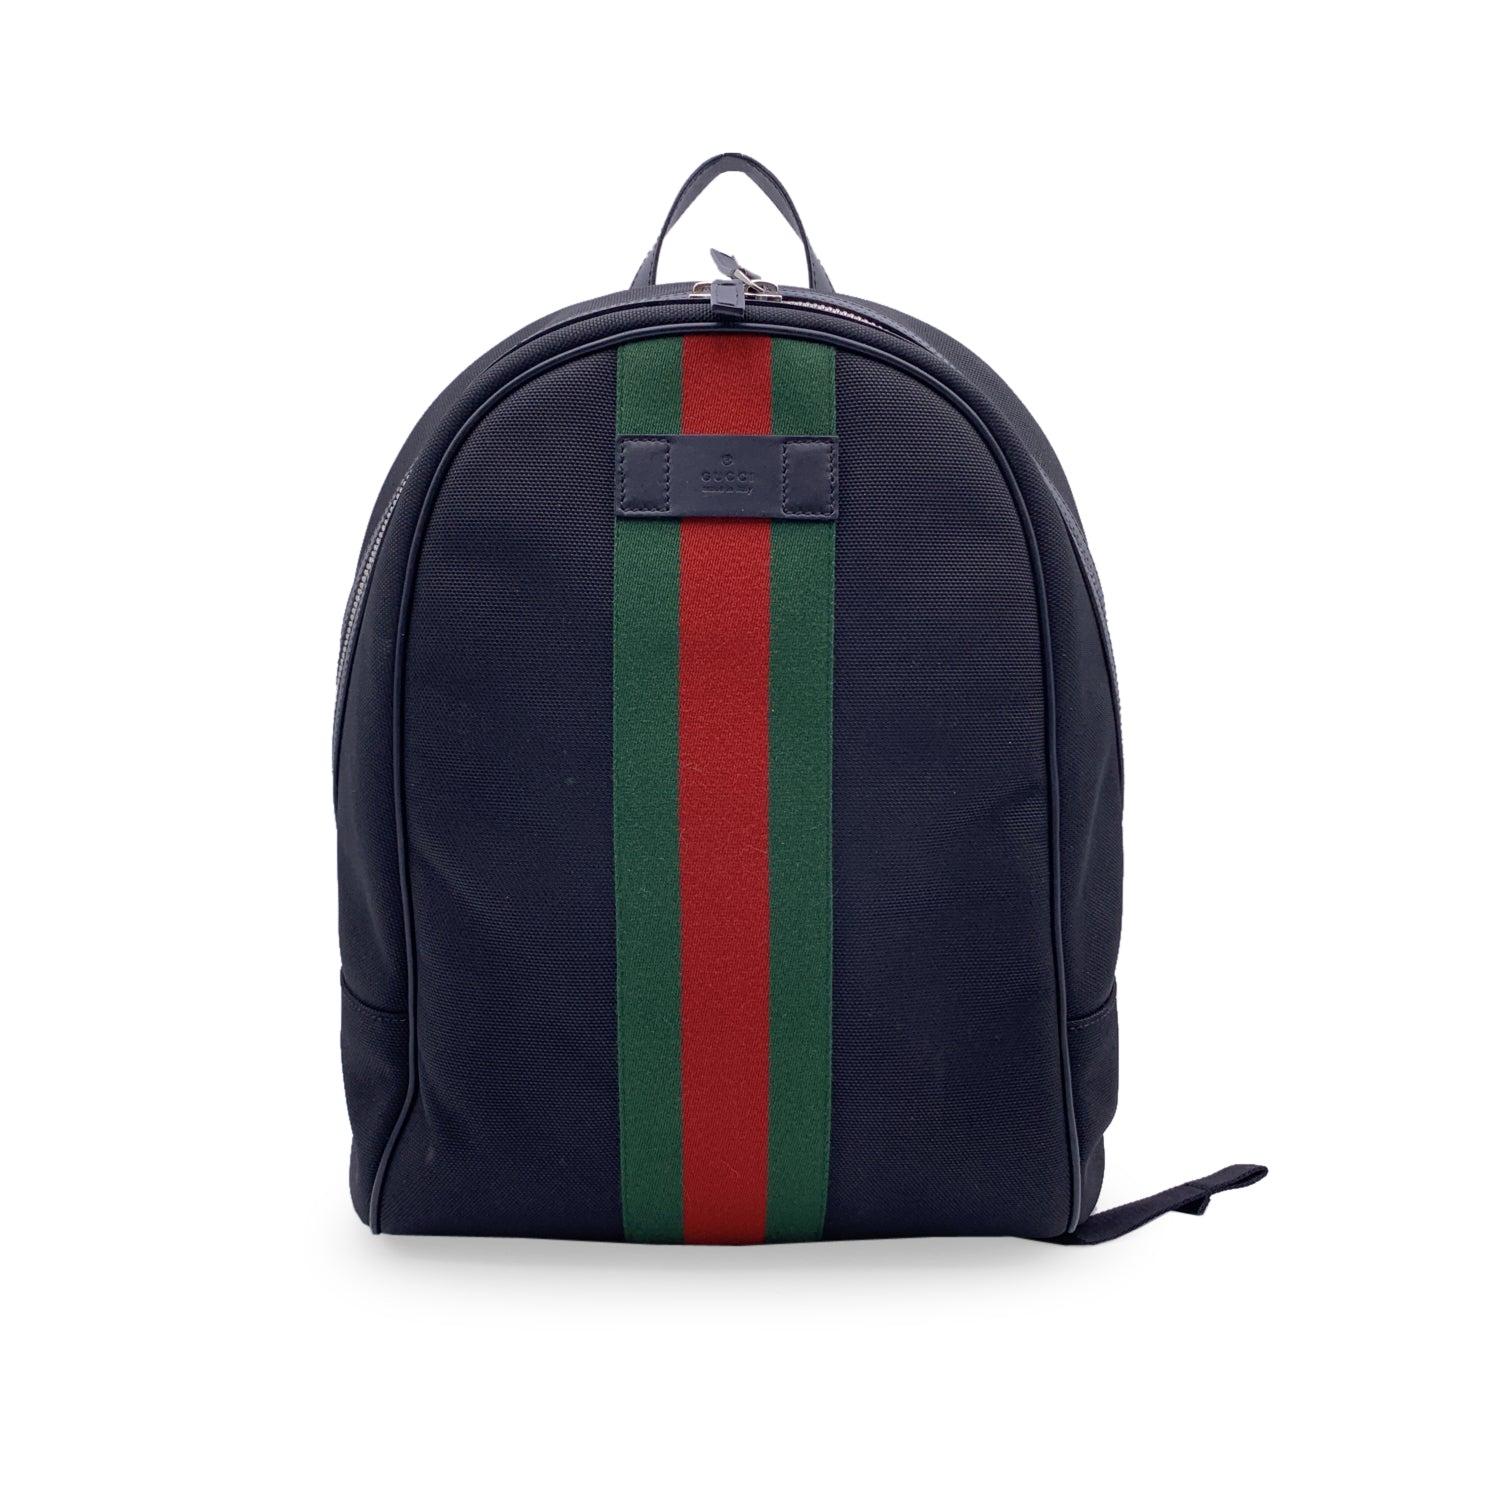 Gucci Black/Grey GG Supreme And Leather Tiger Backpack at 1stDibs